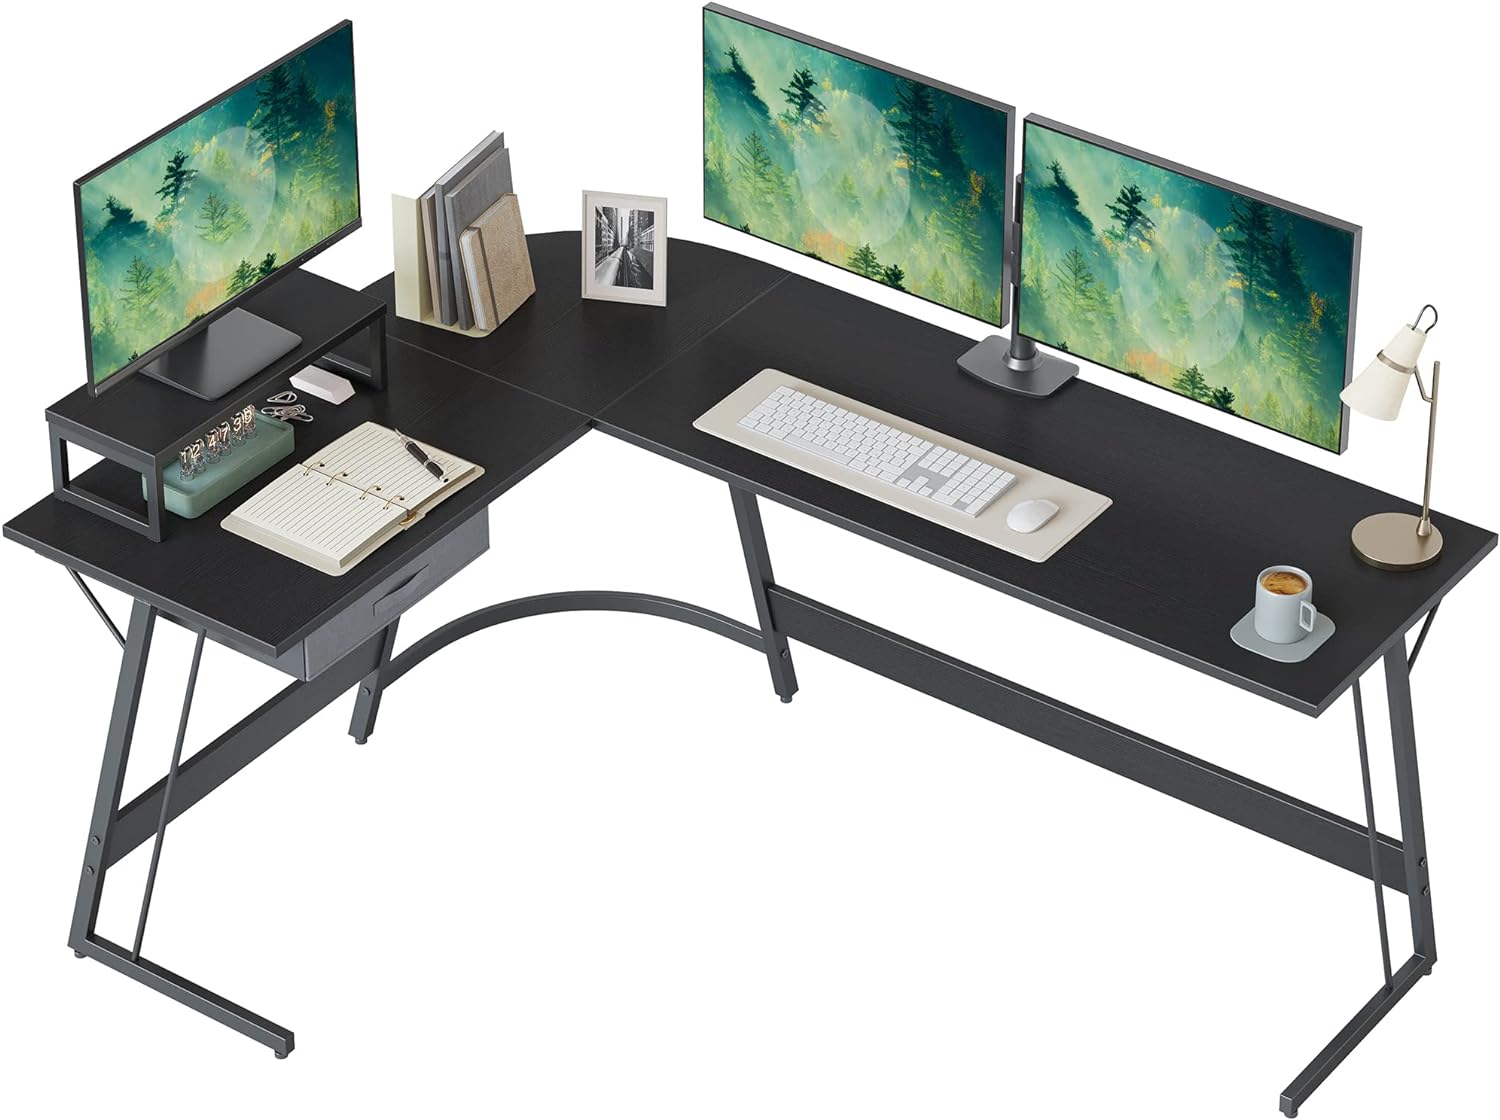 BANTI 67 inch L Shaped Desk, Corner Computer Desk, Gaming Desk with Small Table and Drawer, Home Office Study Writing Workstation, Space-Saving, Black